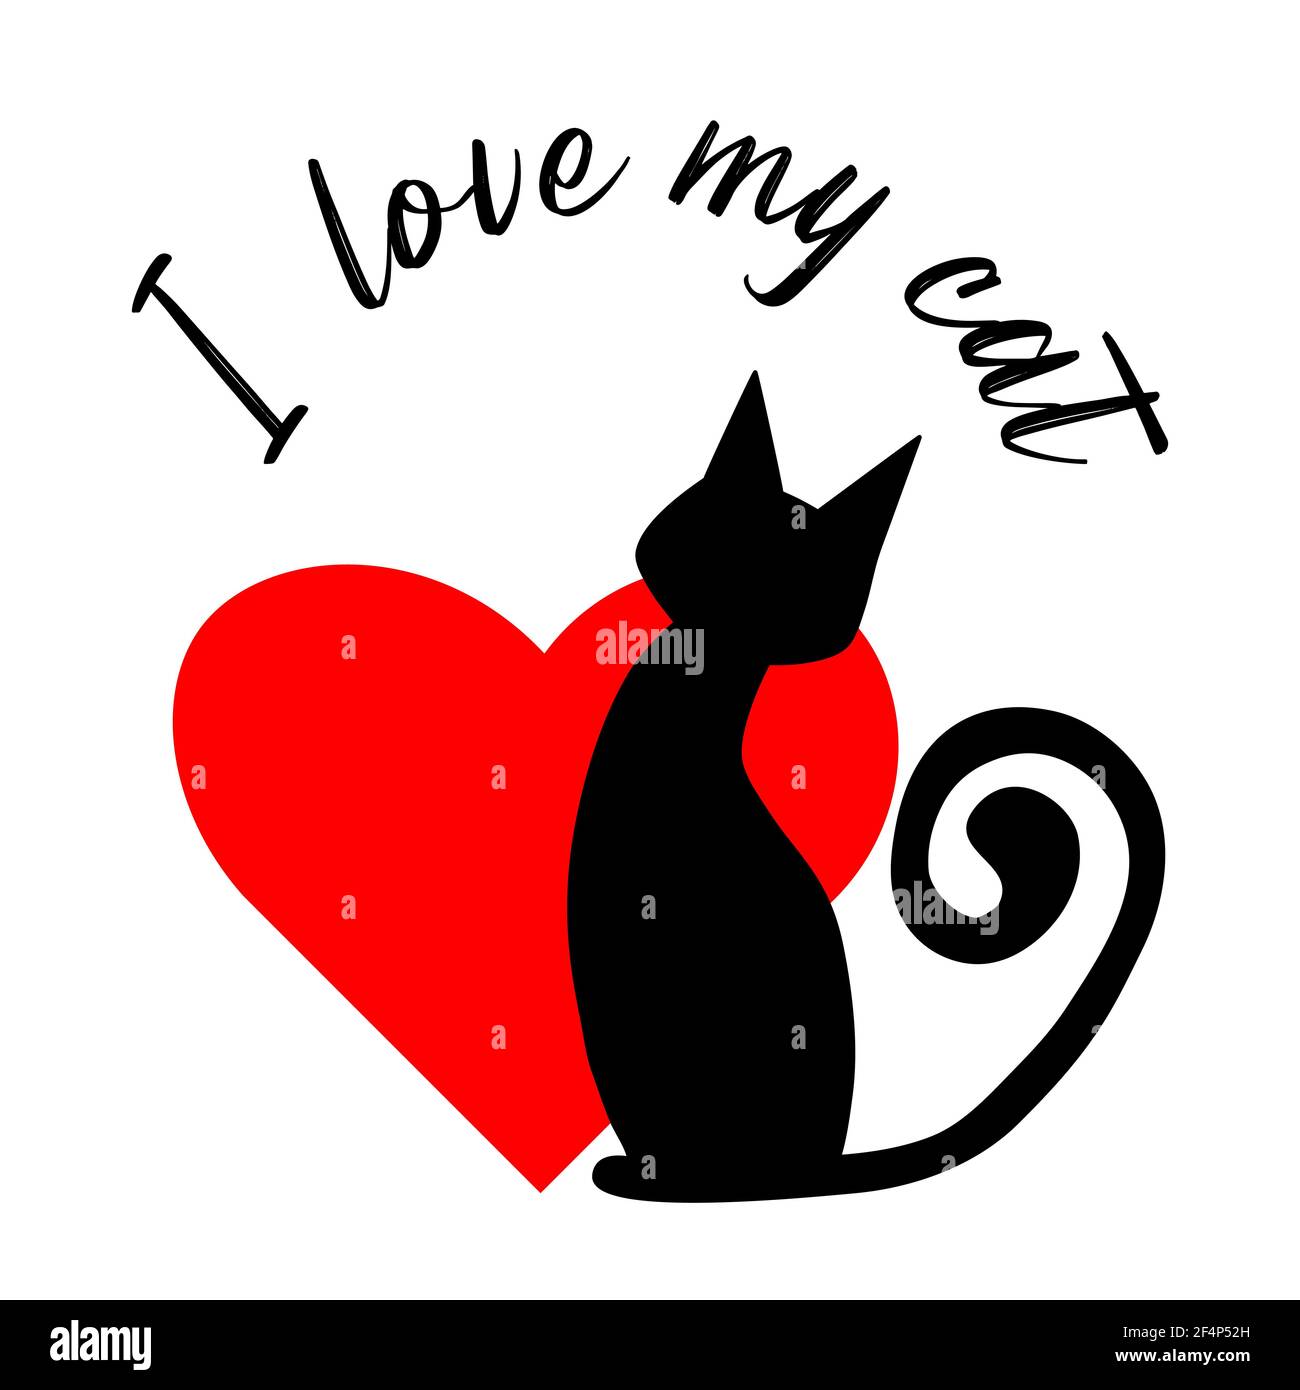 Black silhouette of cat, red heart and quote - I love my cat. Vector hand drawn illustration. Stock Vector